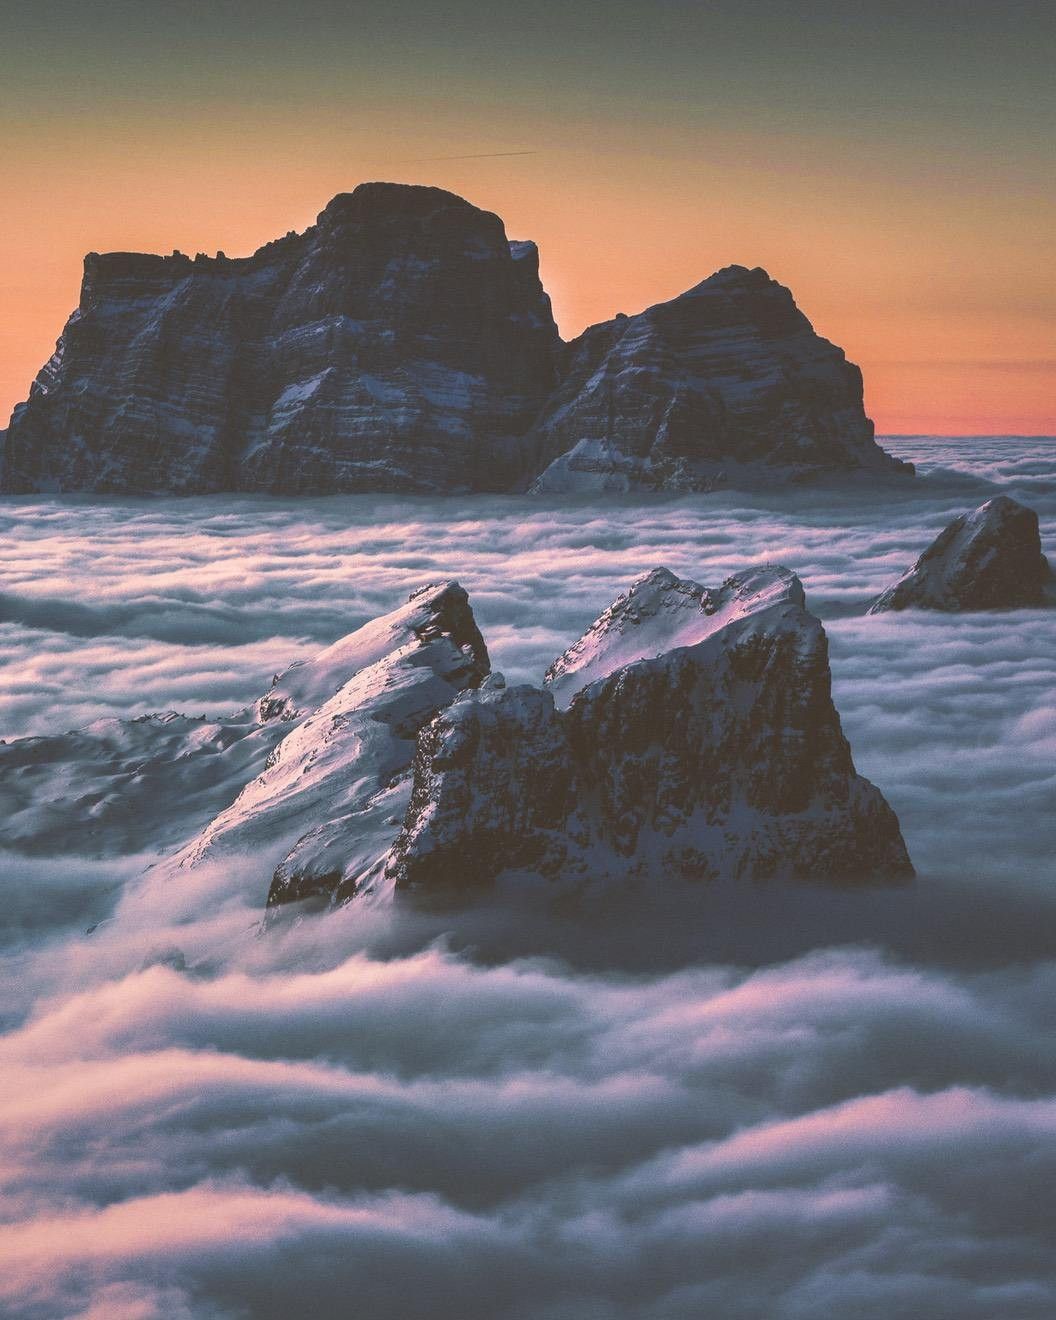 A mountain top is surrounded by clouds - Mountain